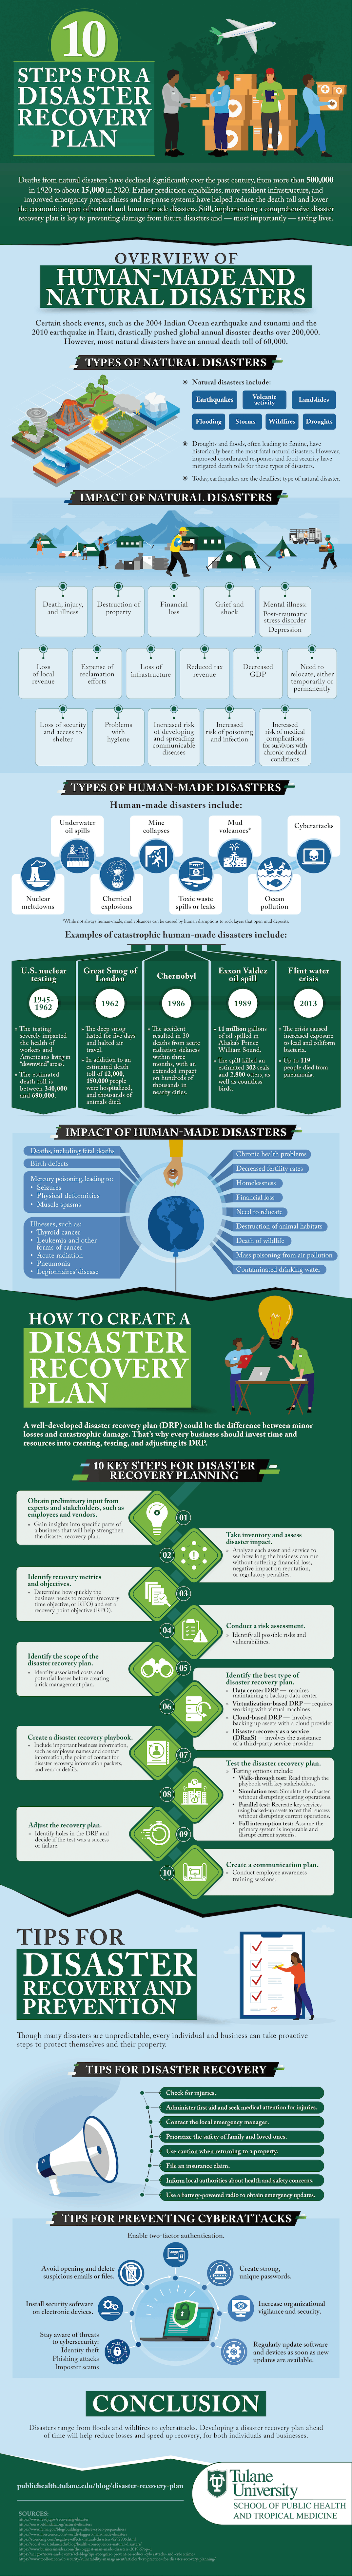 Steps and tips for creating a disaster recovery plan.